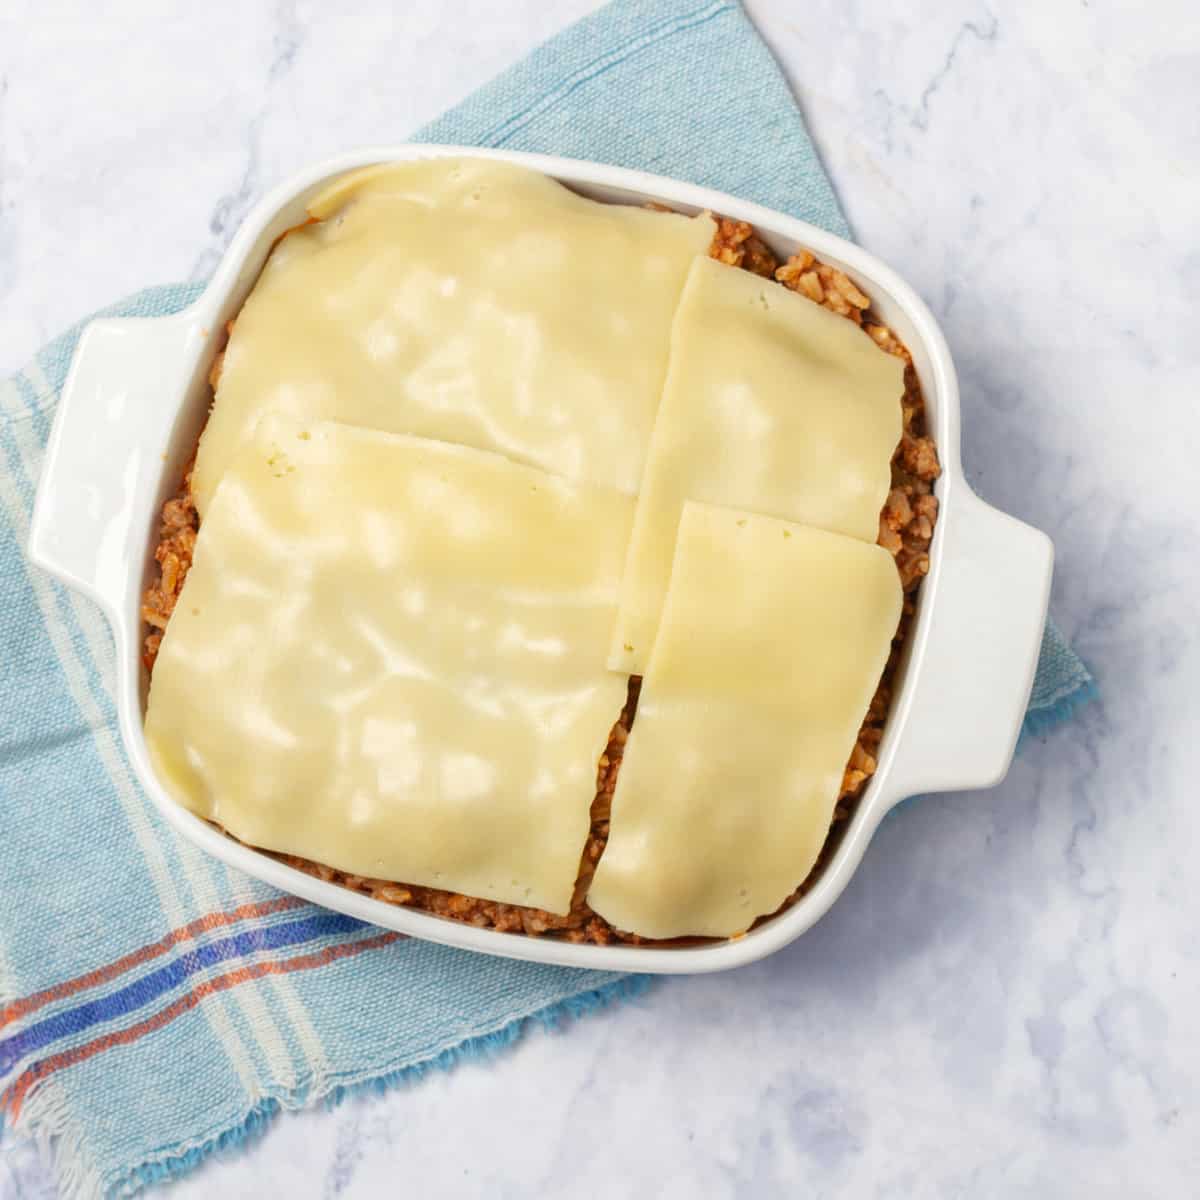 Cooked casserole ingredients assembled in a baking dish with cheese on top.